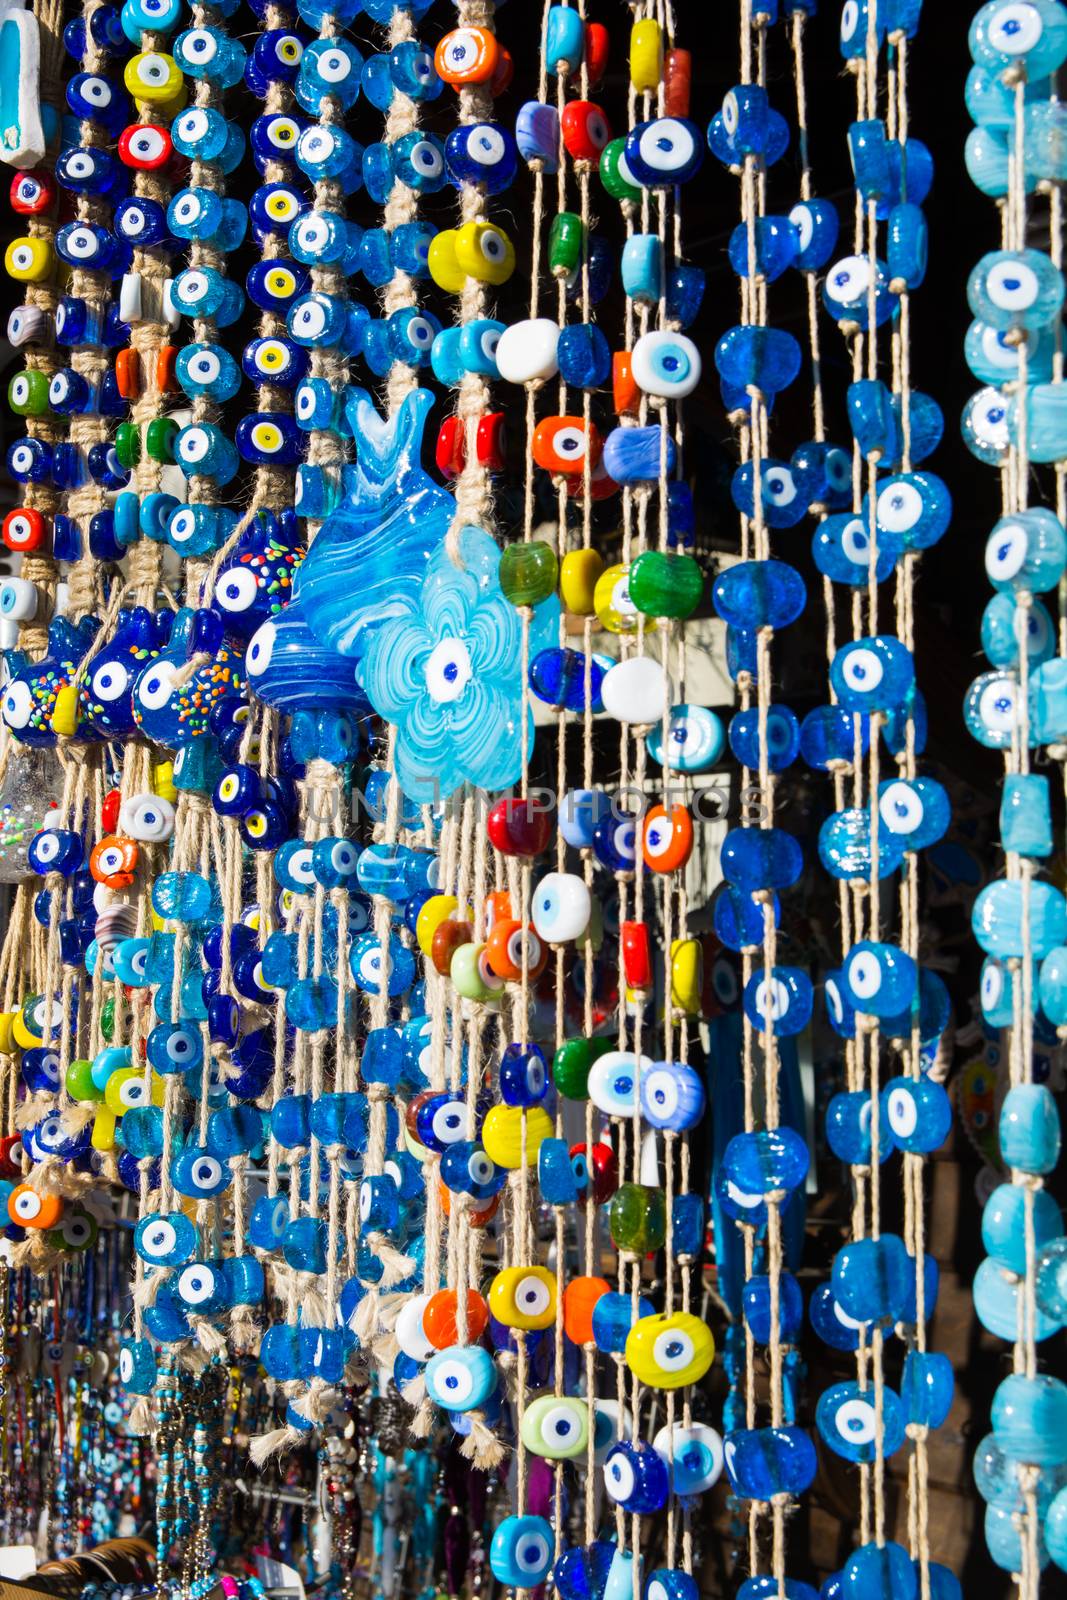 Evil eye bead souvenirs.broken glass is melted and shaped. In culture and religious belief, the figure of the eye is regarded as a powerful amulet protecting evil. It is a powerful talisman in Turkish culture.